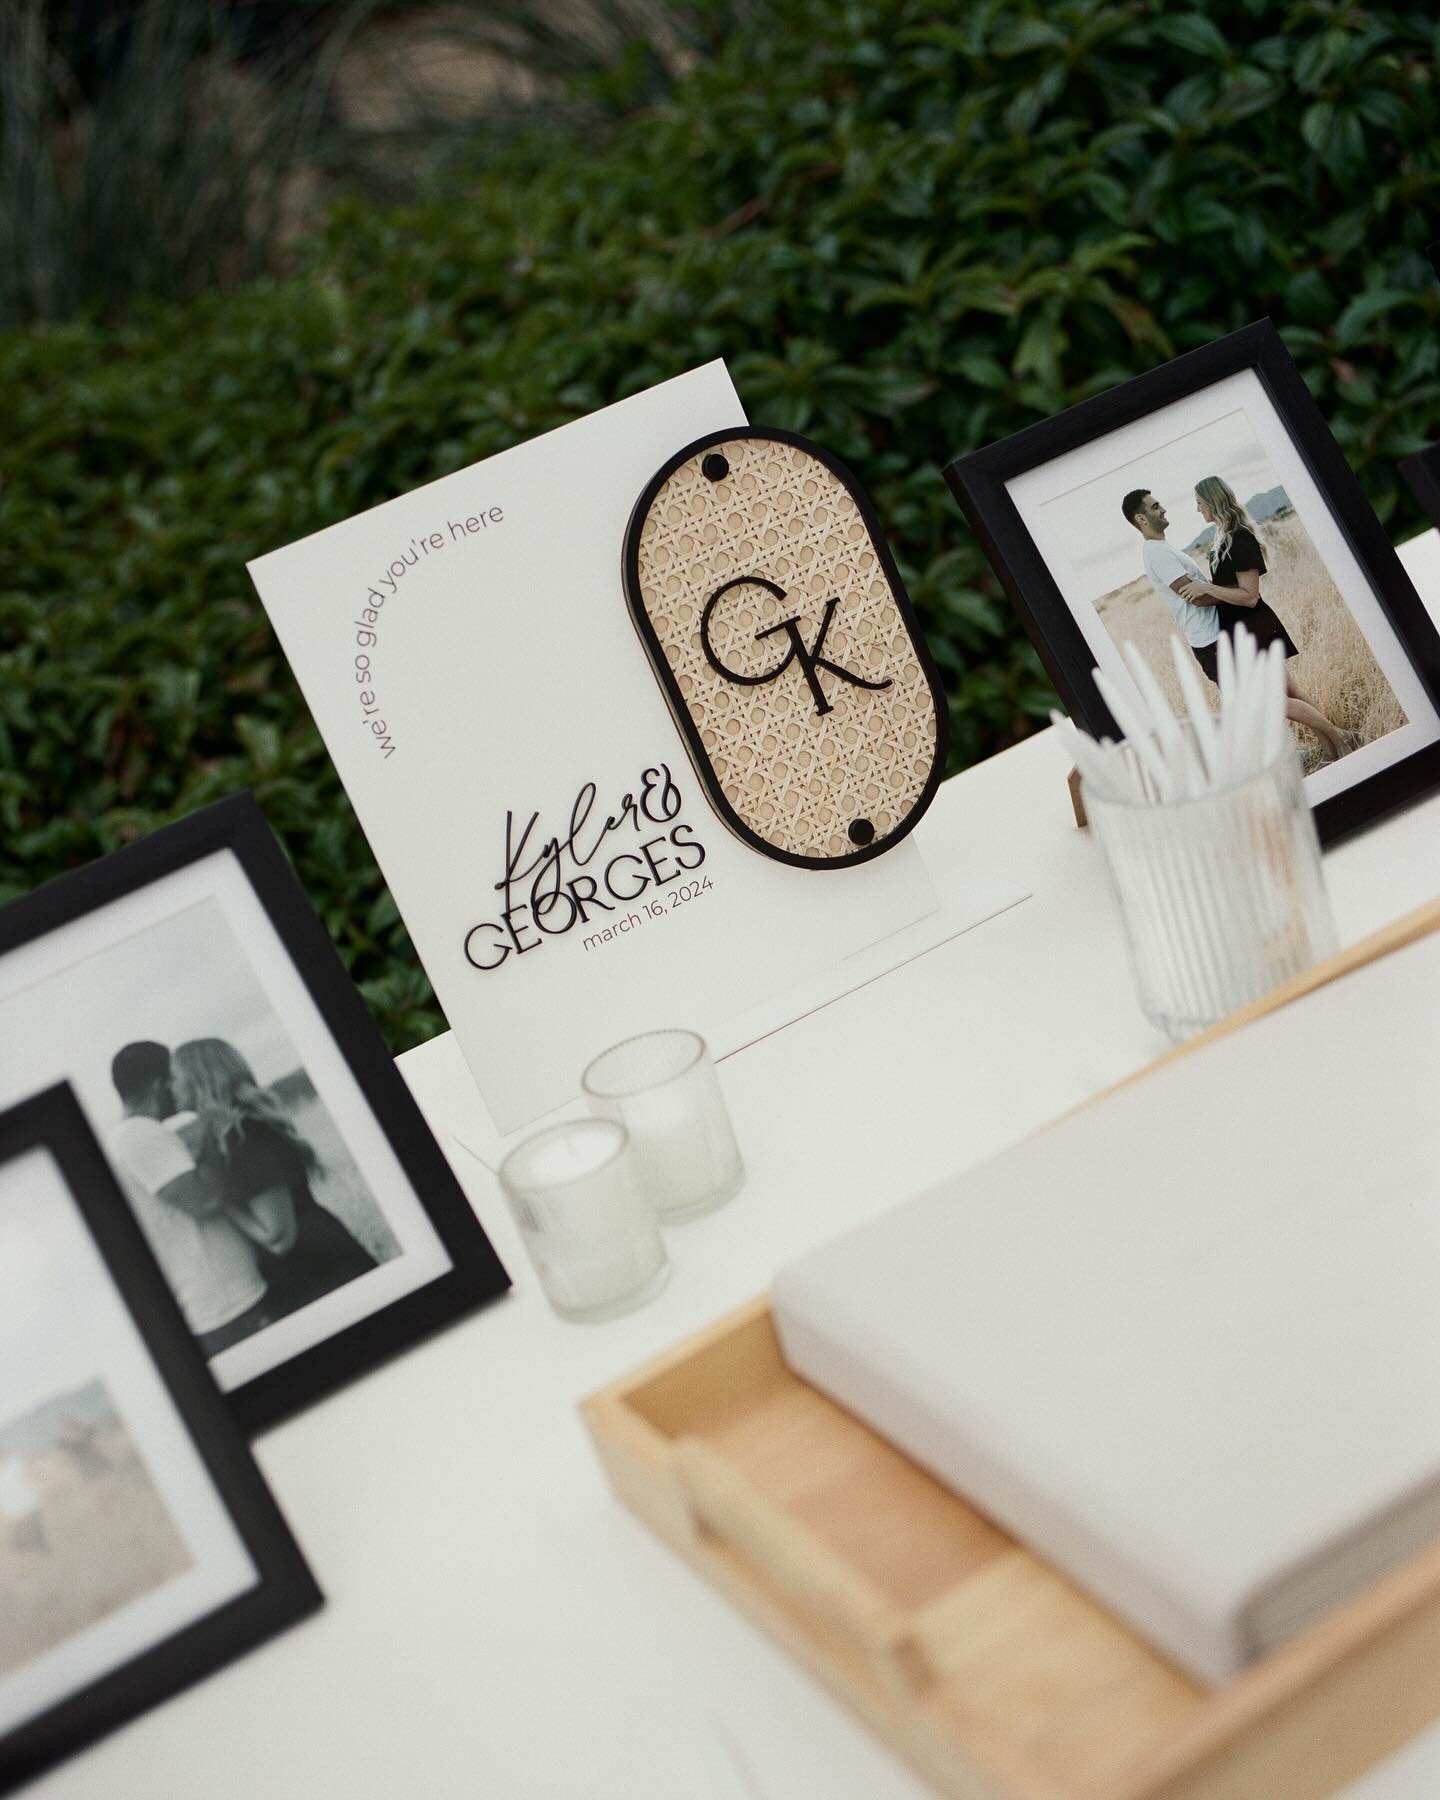 &mdash;WEDDING WEDNESDAY&mdash;

Today we are highlighting Kyler &amp; Georges beautiful wedding! We loved creating the sleek and chic design they wanted for their wedding! We also added the fun material of rattan cane webbing to give their signage a